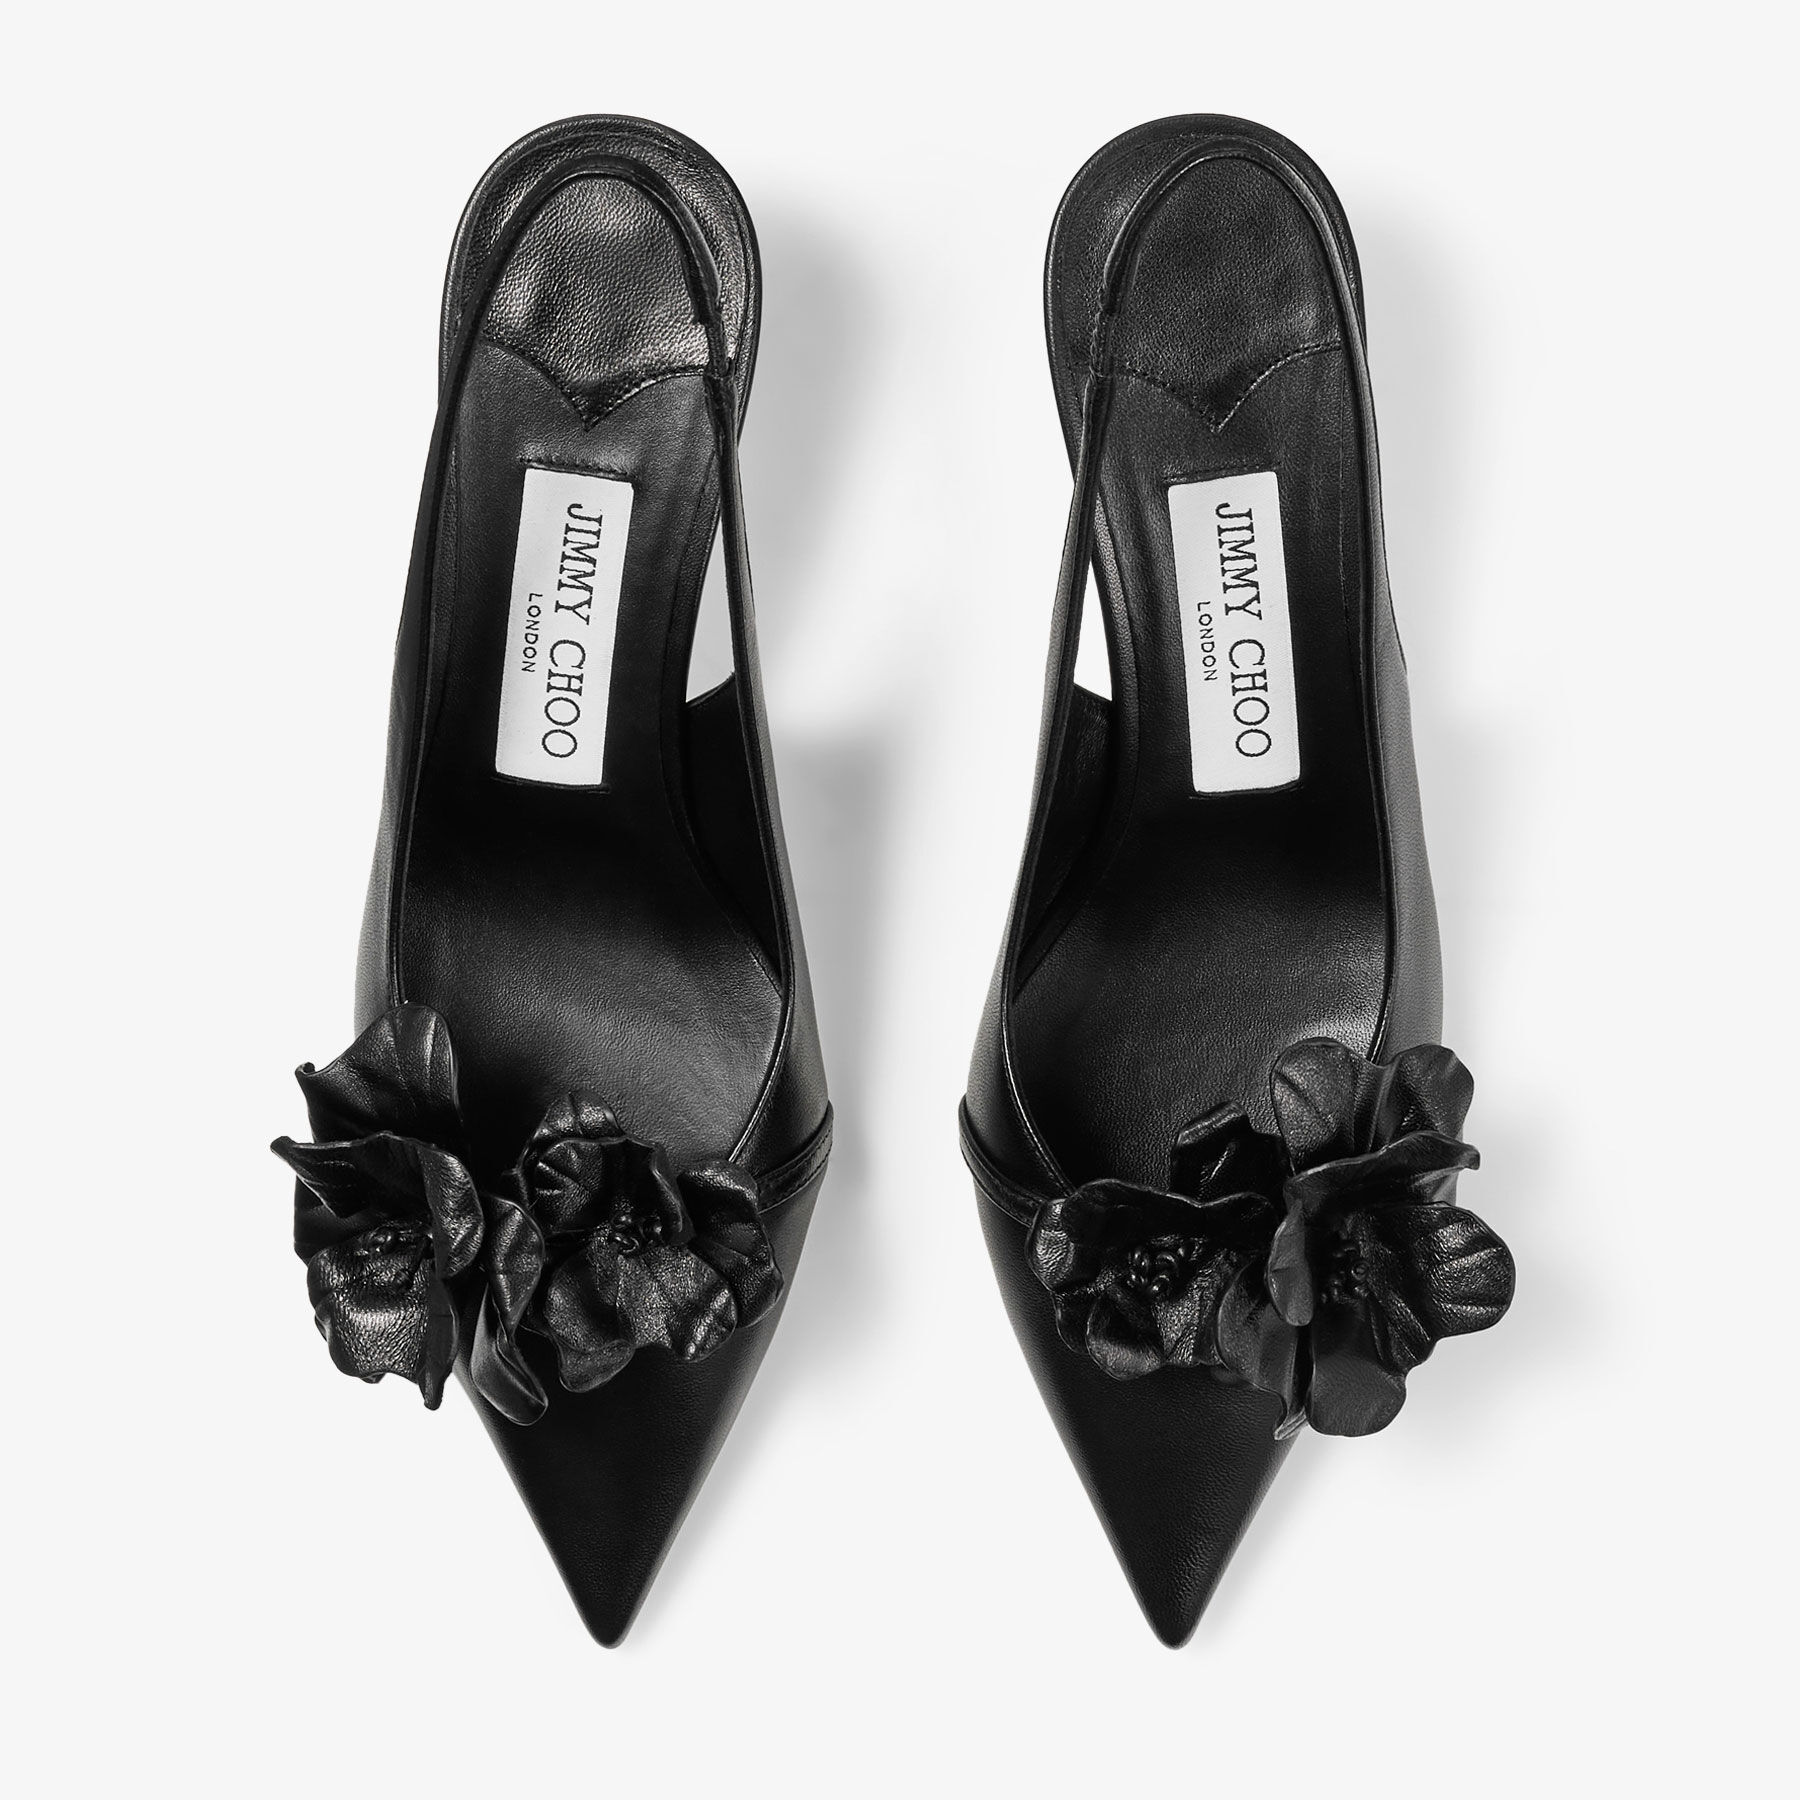 AMITA/FLOWERS 45 | Black Nappa Leather Sling Back Pumps with Flowers ...